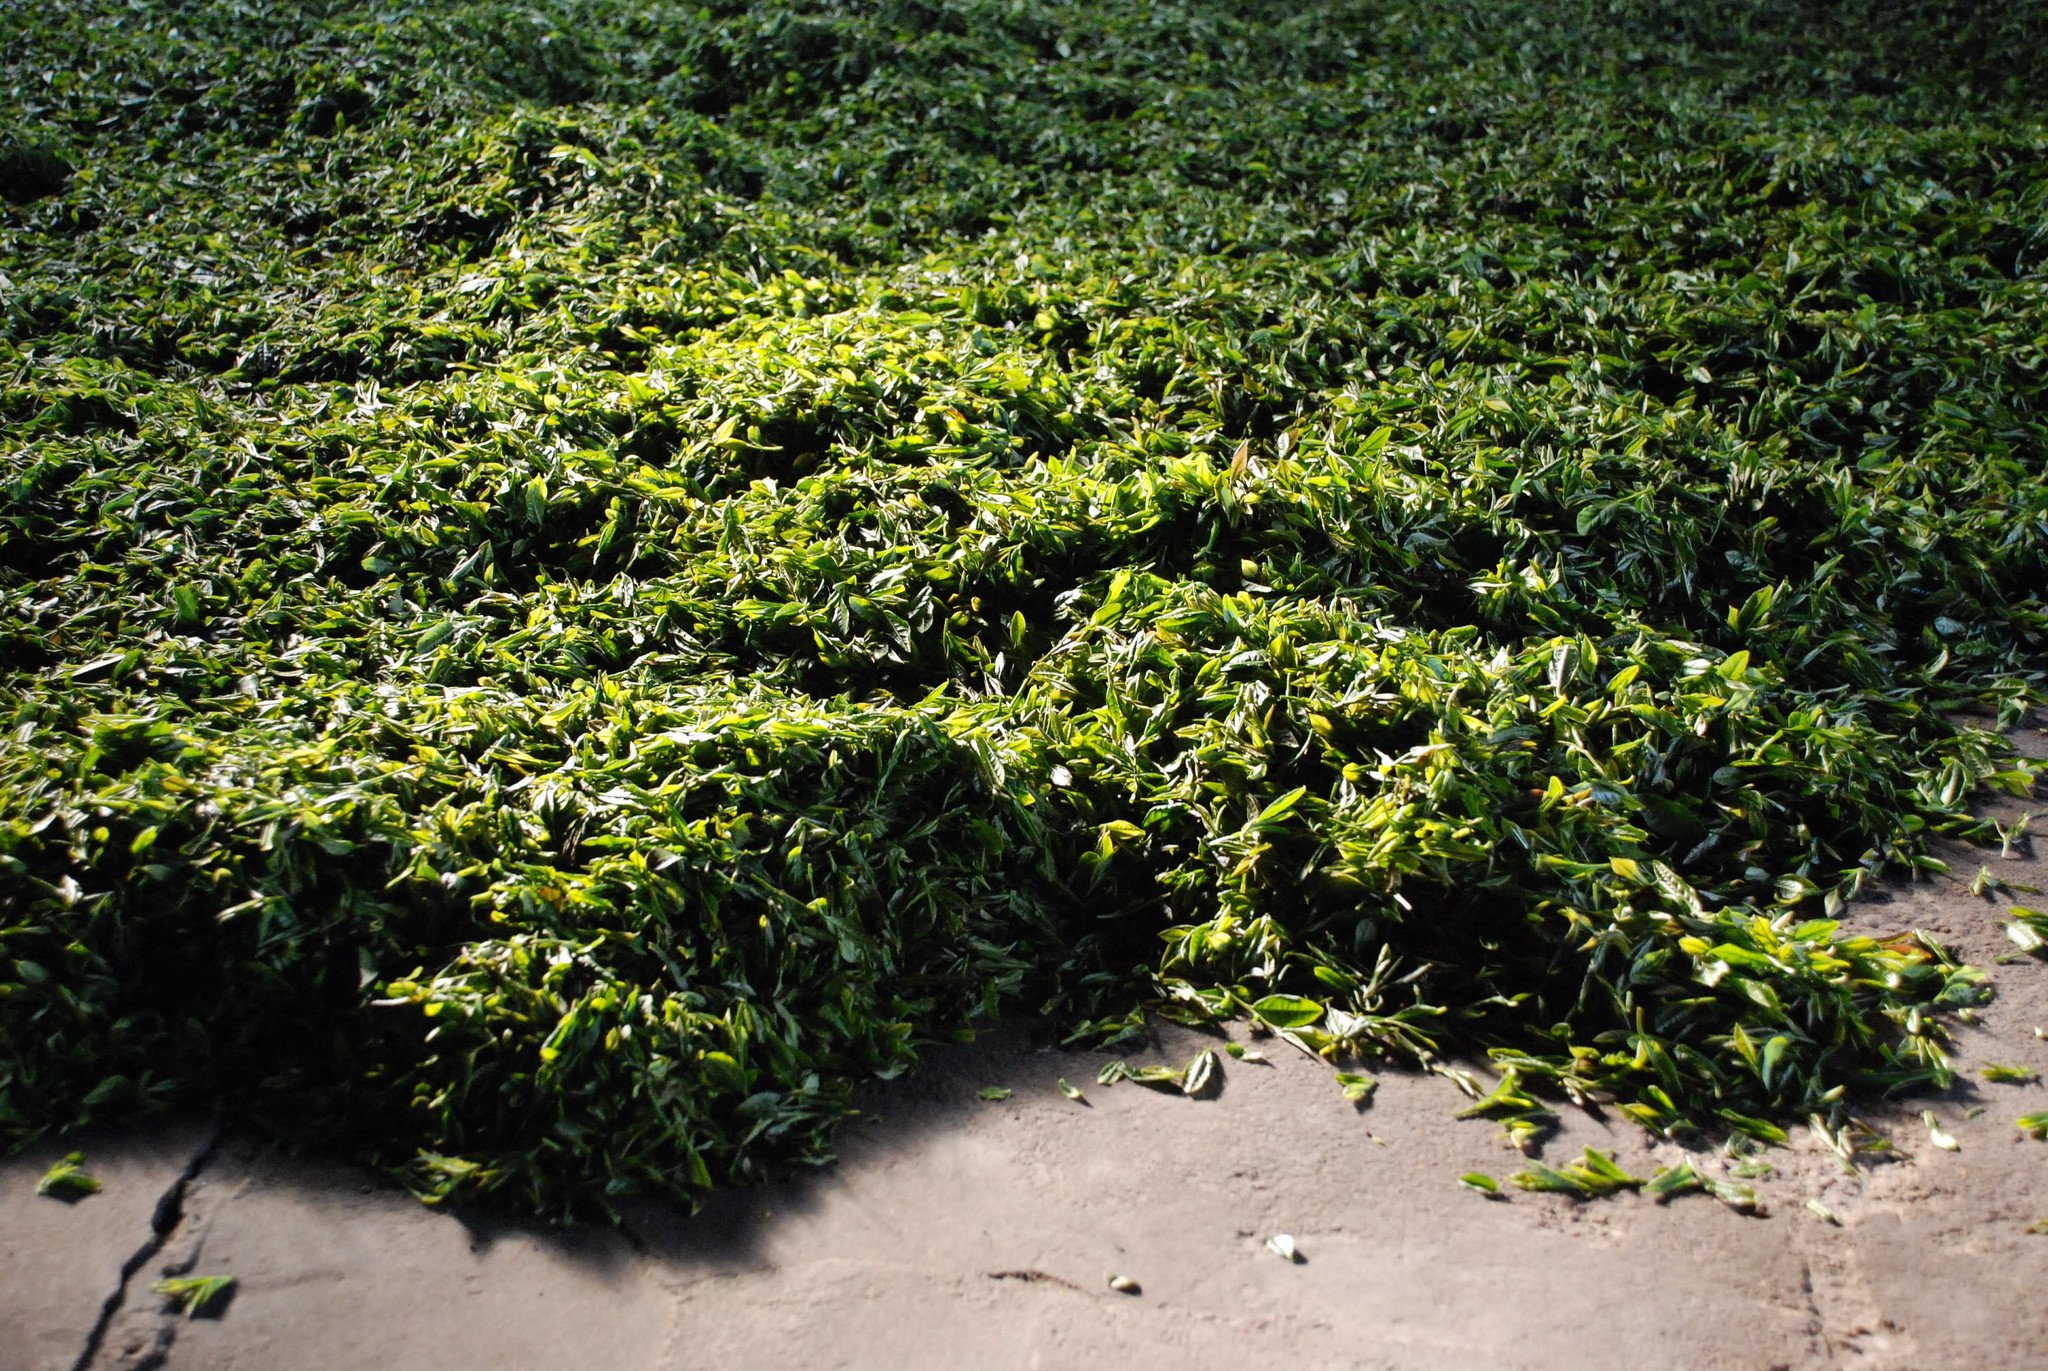 A Close Up of the Tea Leaves Pile